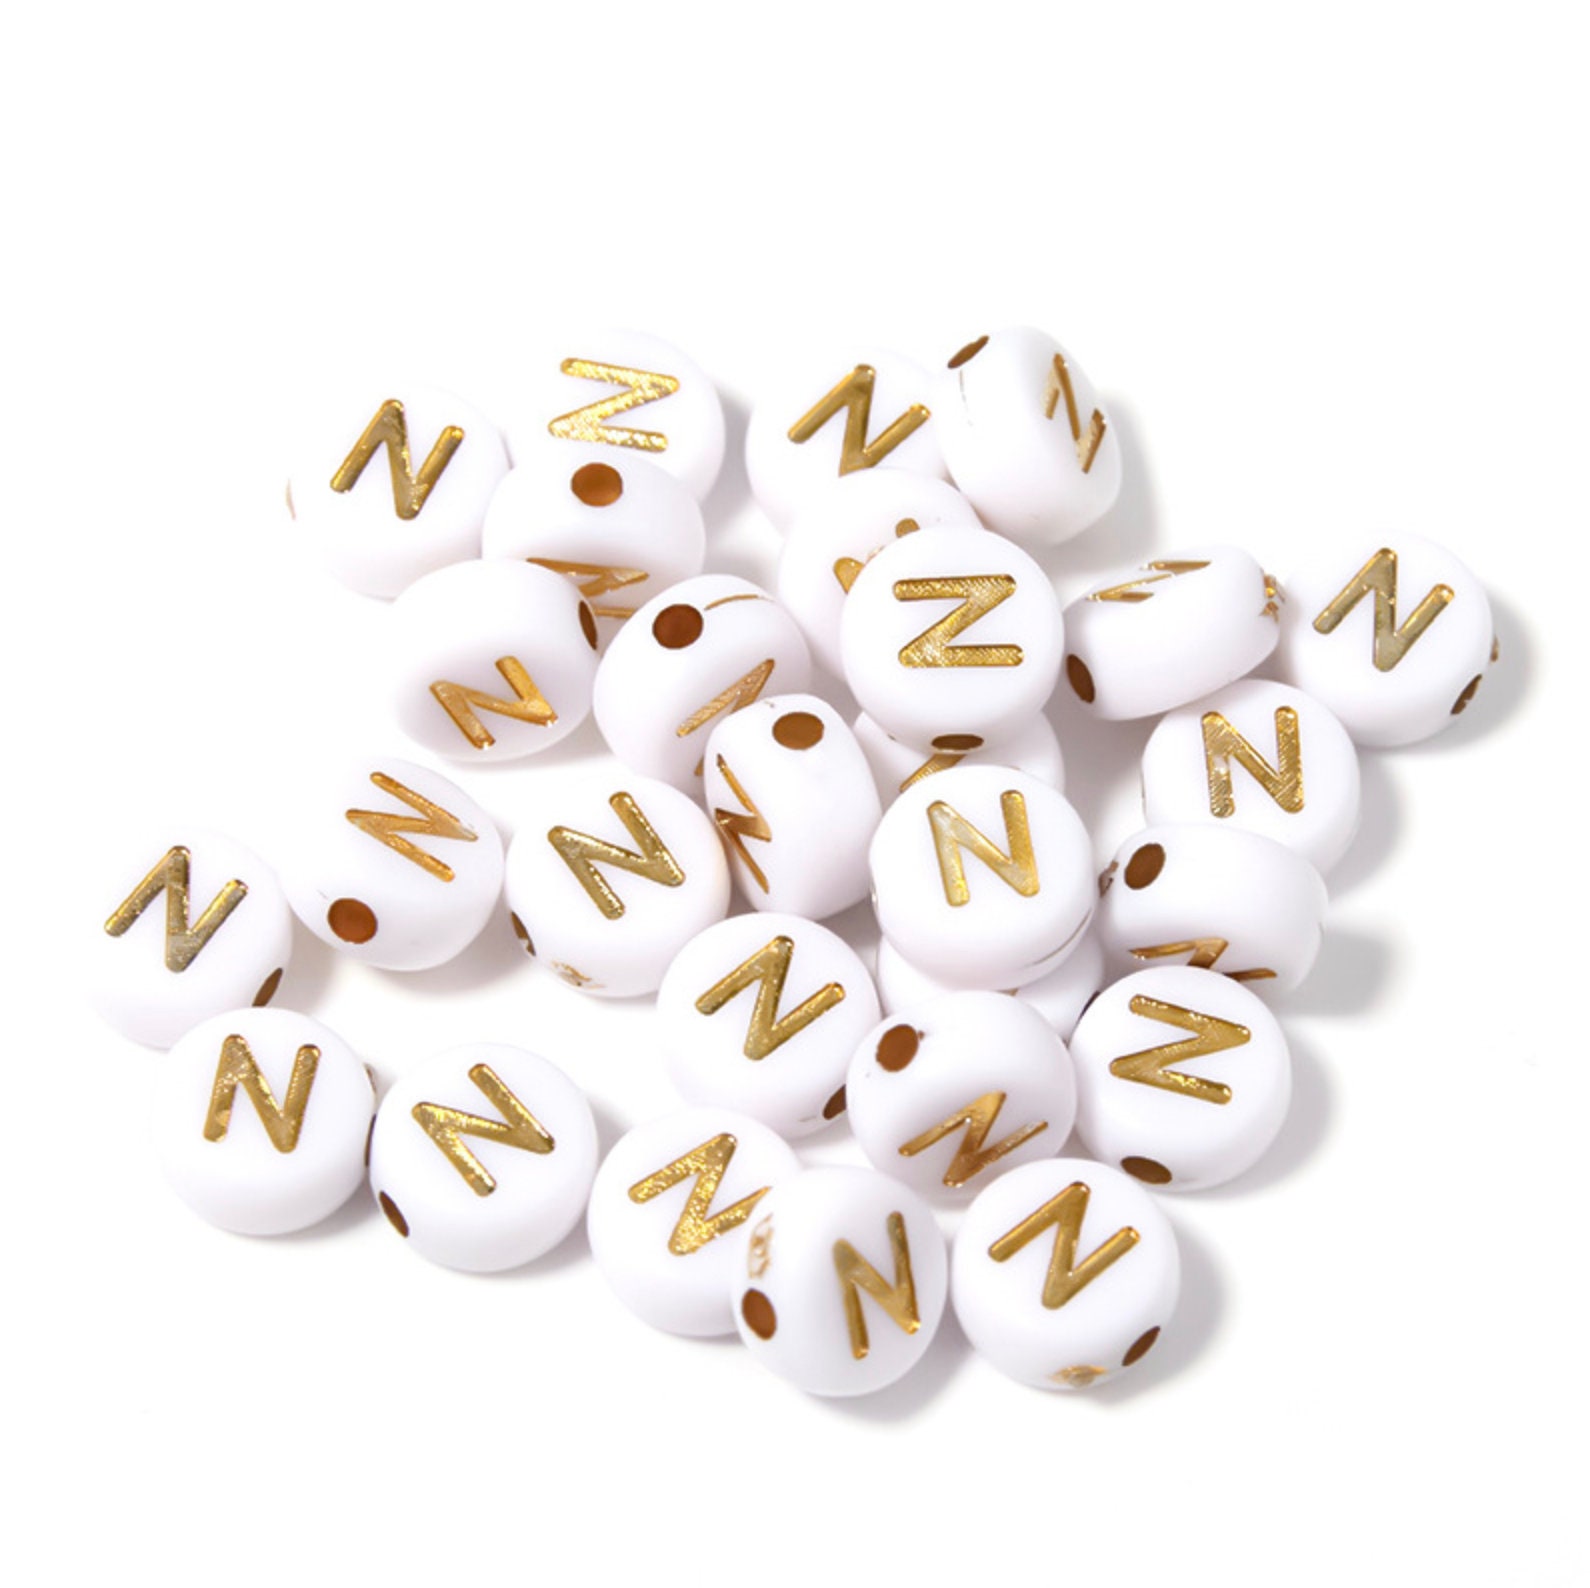 DoreenBow 2200+PCS Acrylic Letter Beads AZ Letter and Number Beads Round  Alphabet Letter Beads for Jewelry Making Bracelets Necklaces and String